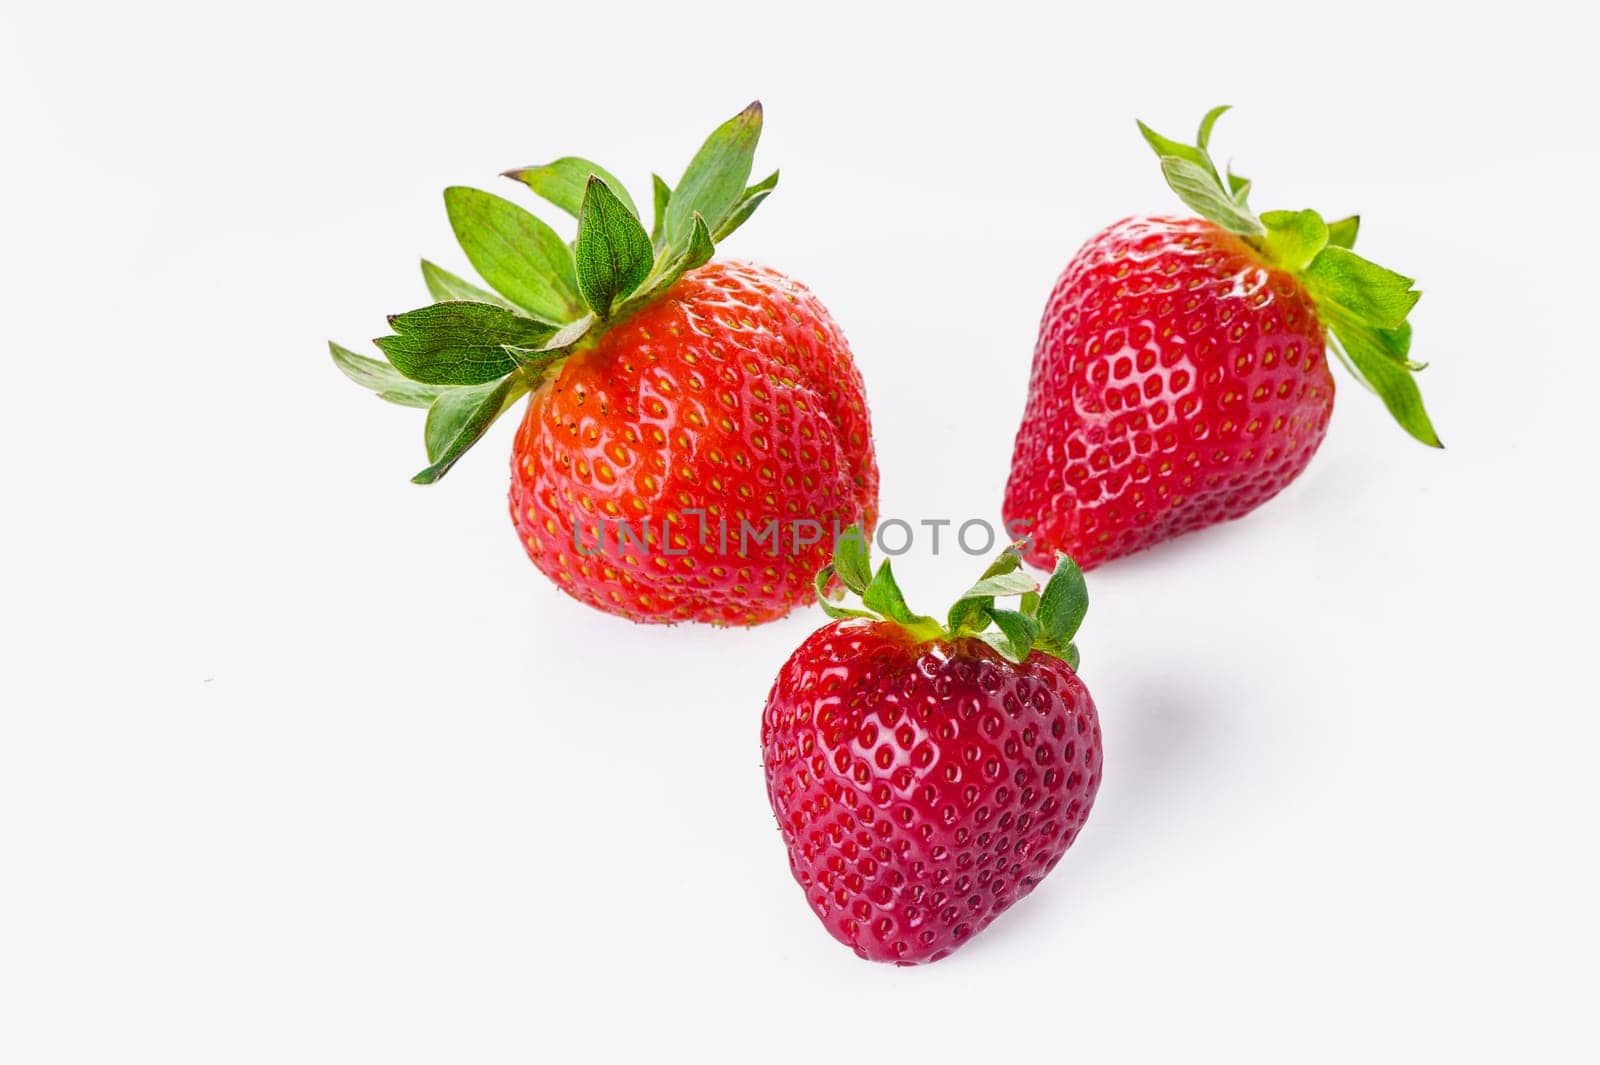 Group of Fresh Strawberries on White background Isolated 1 by Mixa74